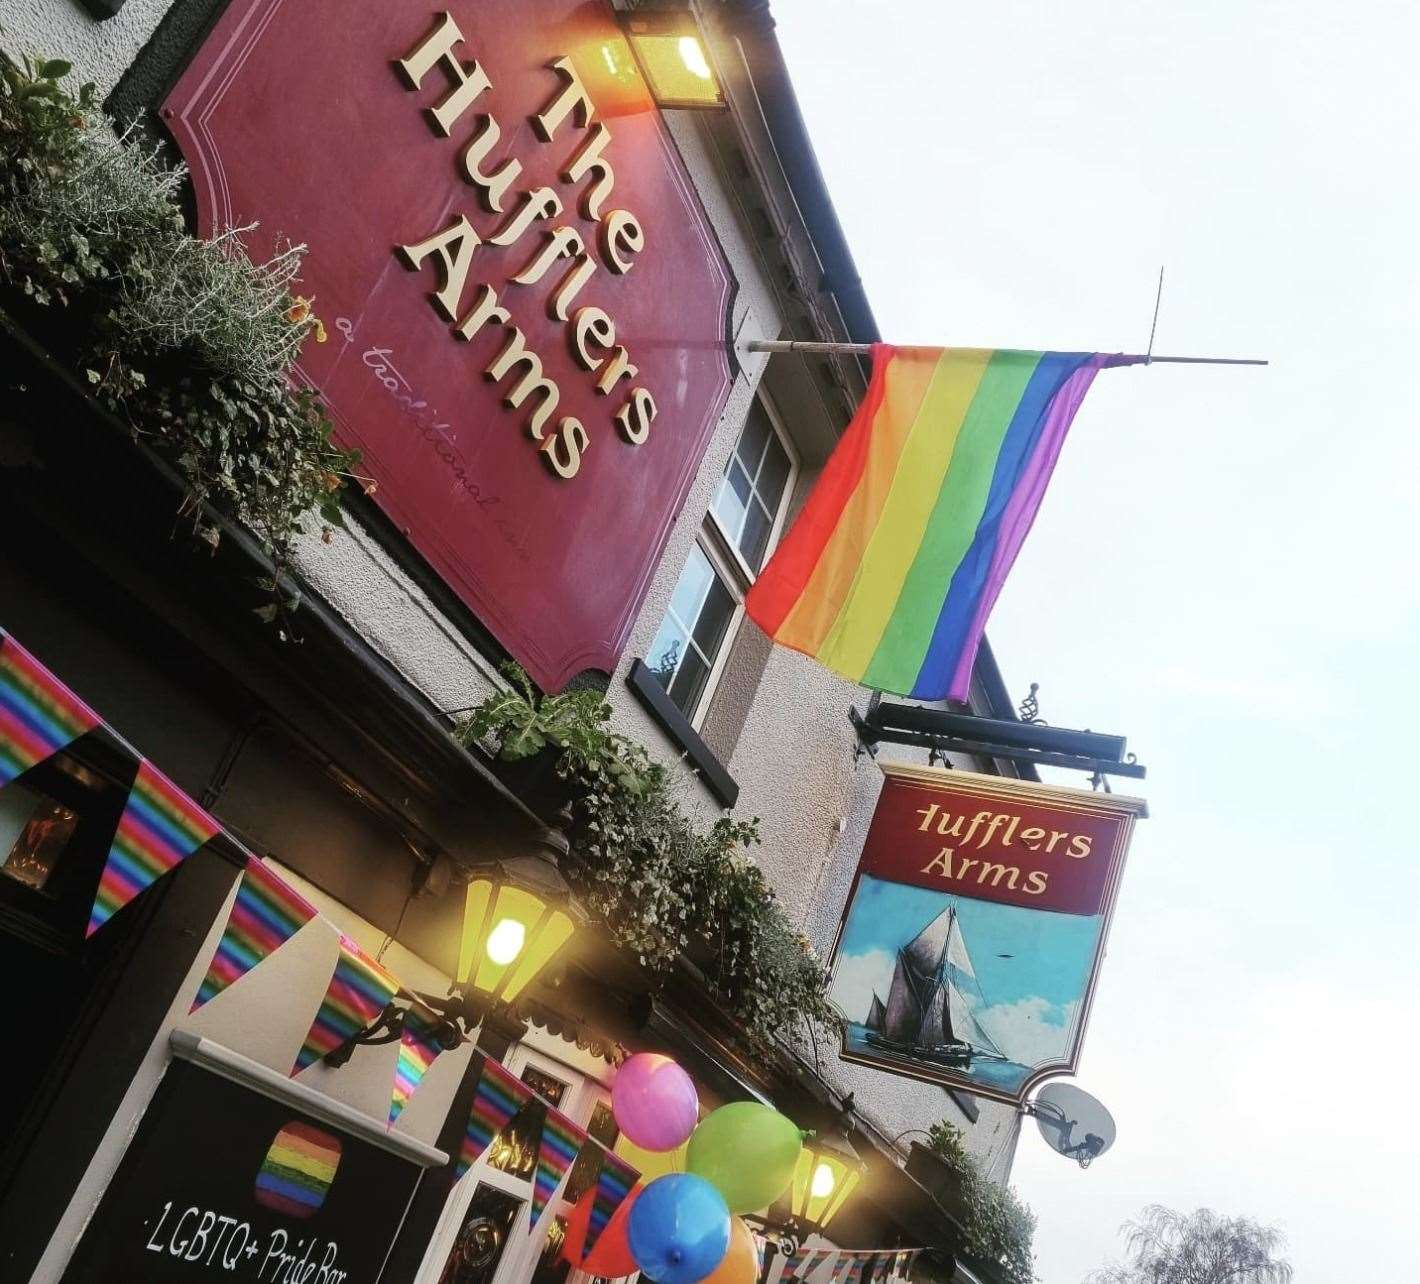 Kent's newest gay bar in Dartford. Picture: Huffler's Arms